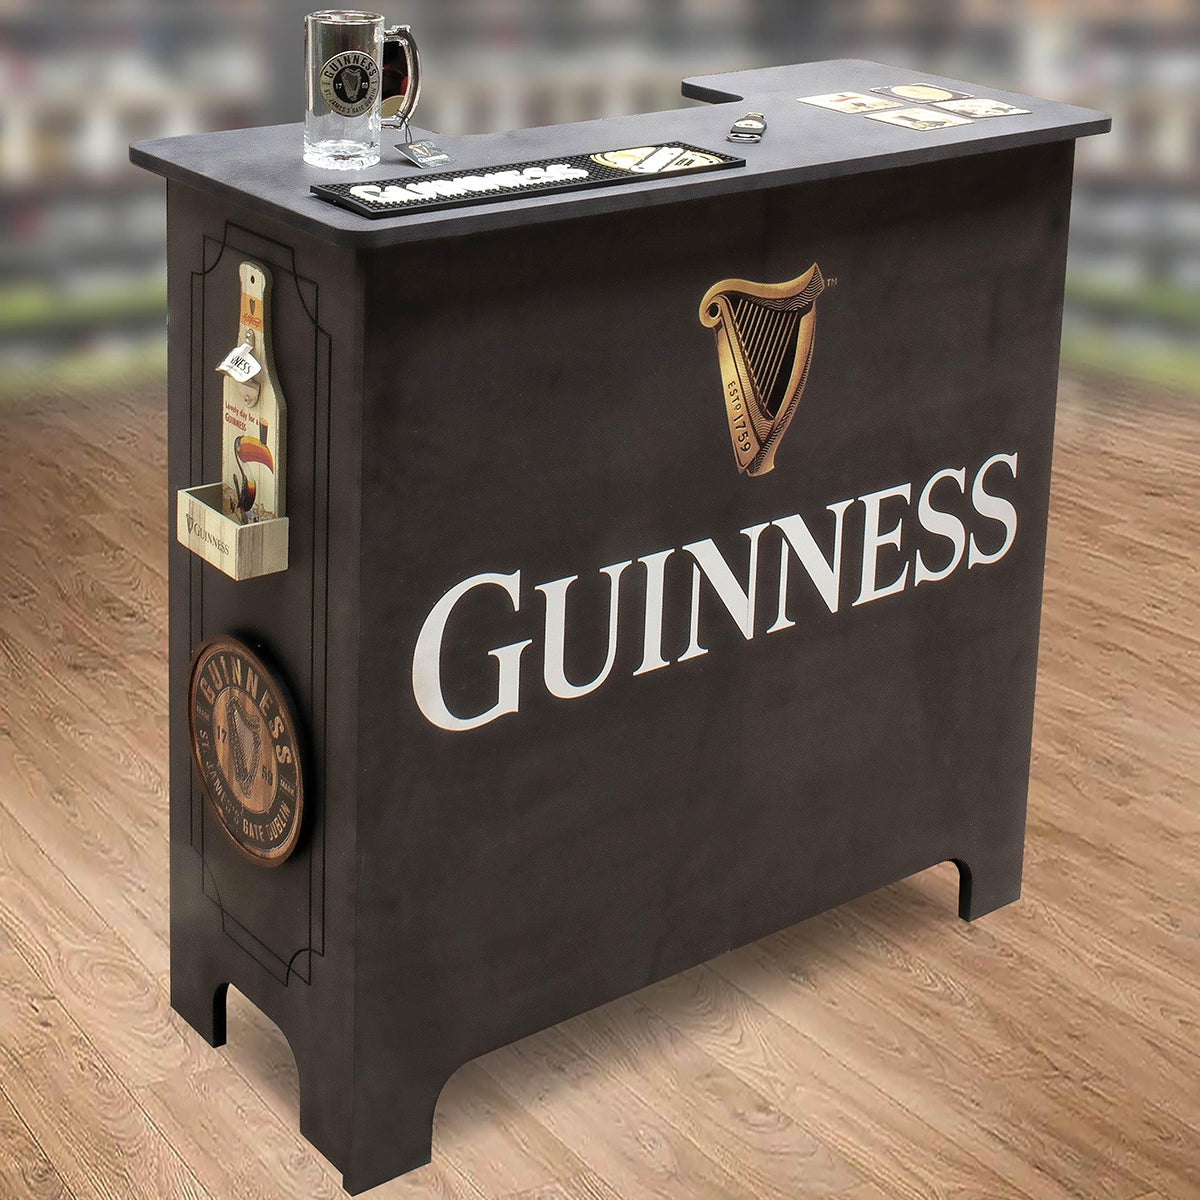 A Guinness® Guinness Home Bar showcasing a bottle of Guinness®, perfect for Guinness® enthusiasts and optimized for SEO.